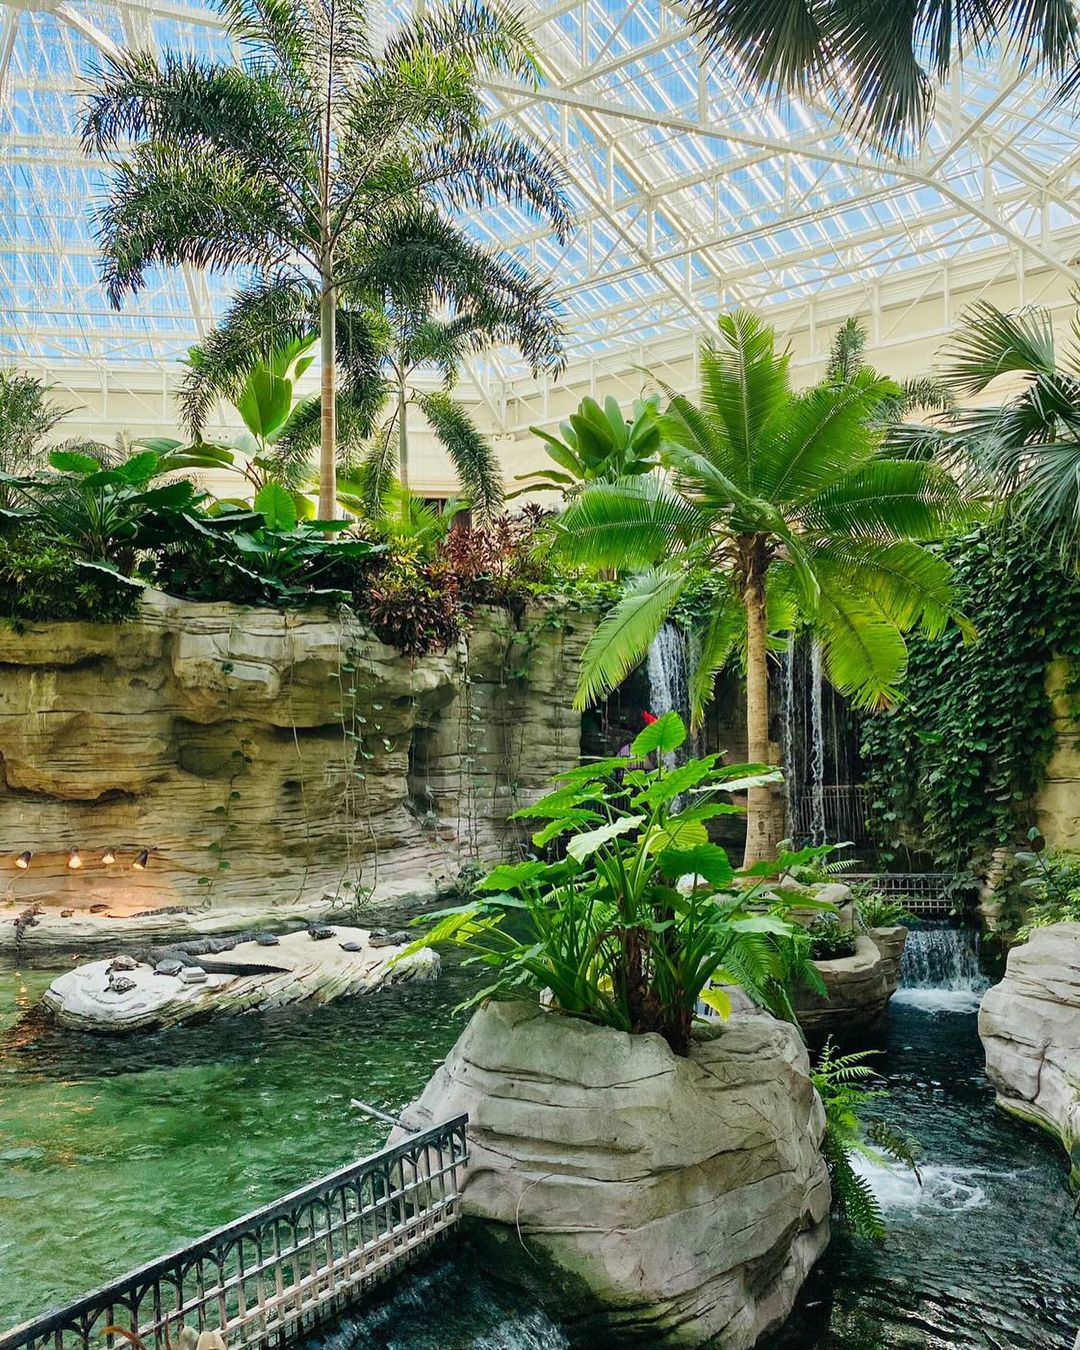 Gaylord Palms Resort & Convention Center, Kissimmee